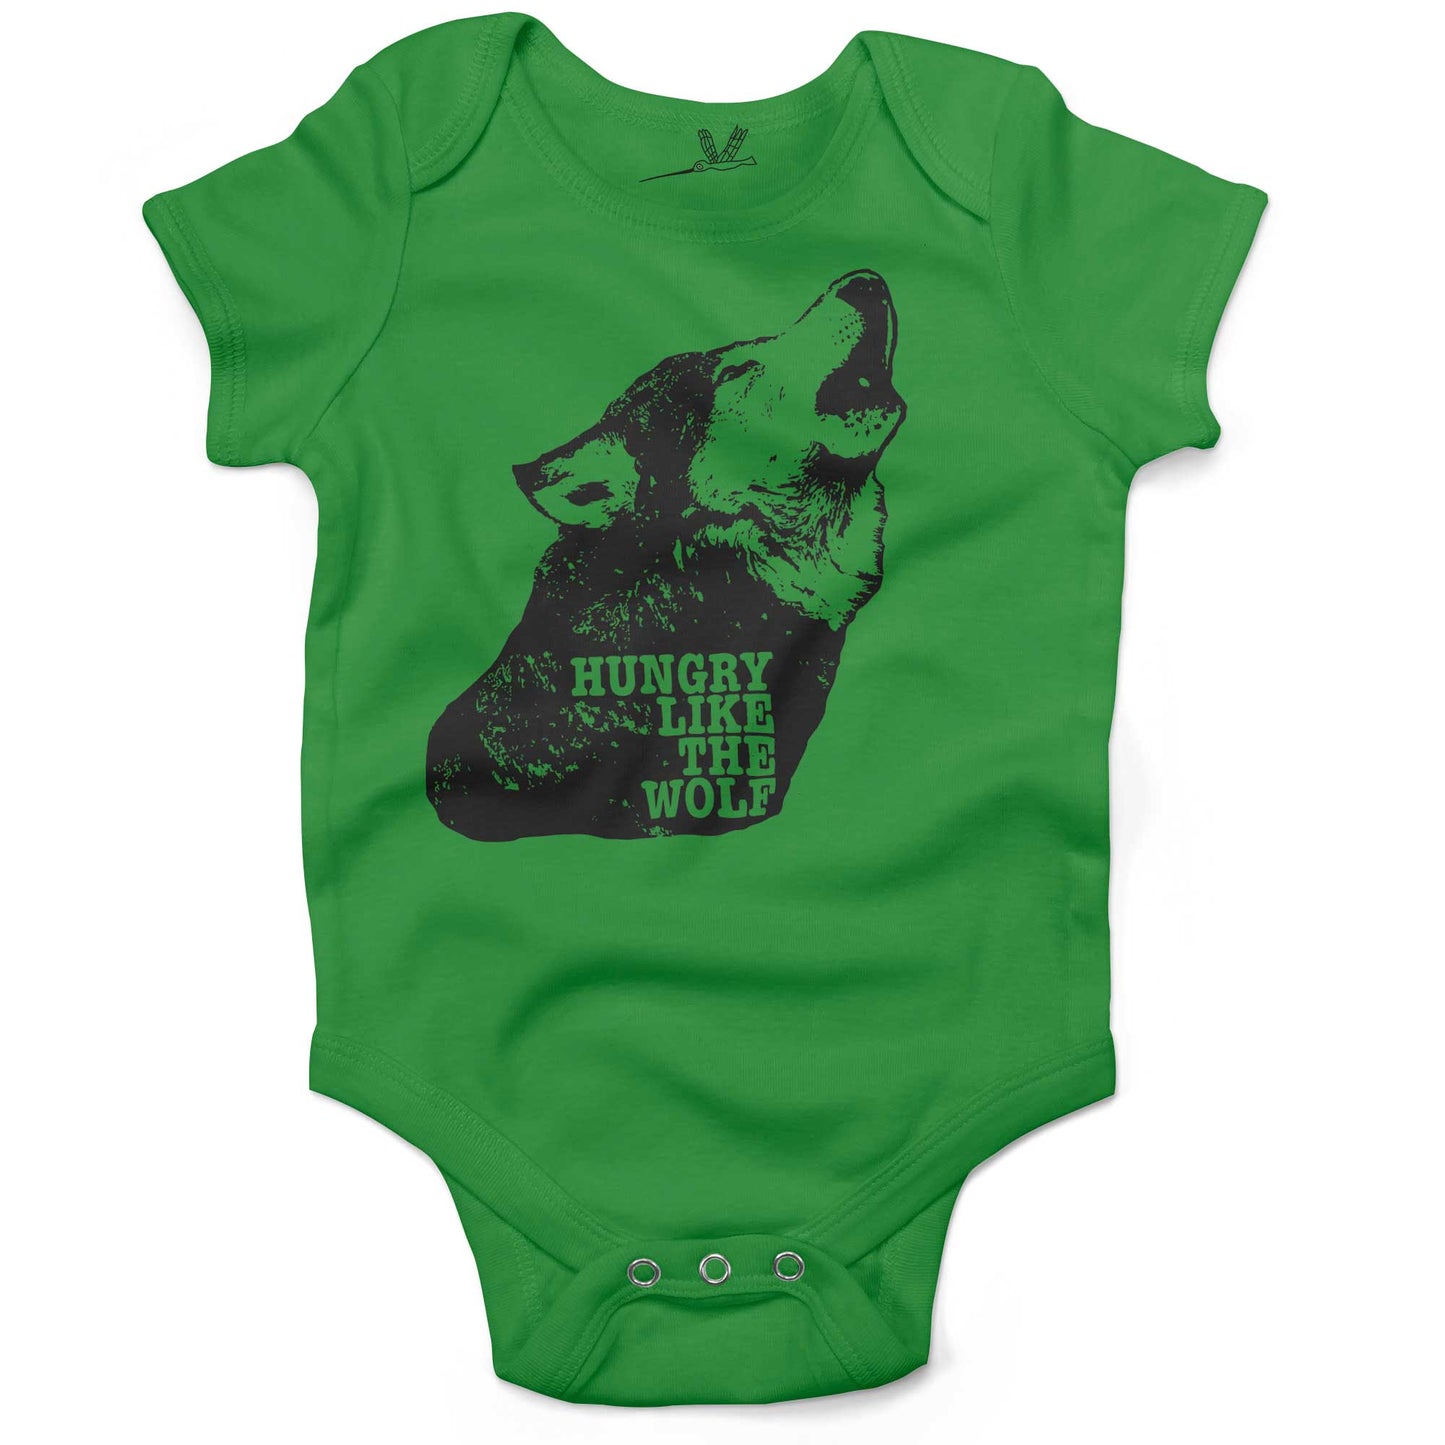 Hungry Like The Wolf Infant Bodysuit or Raglan Baby Tee-Grass Green-3-6 months